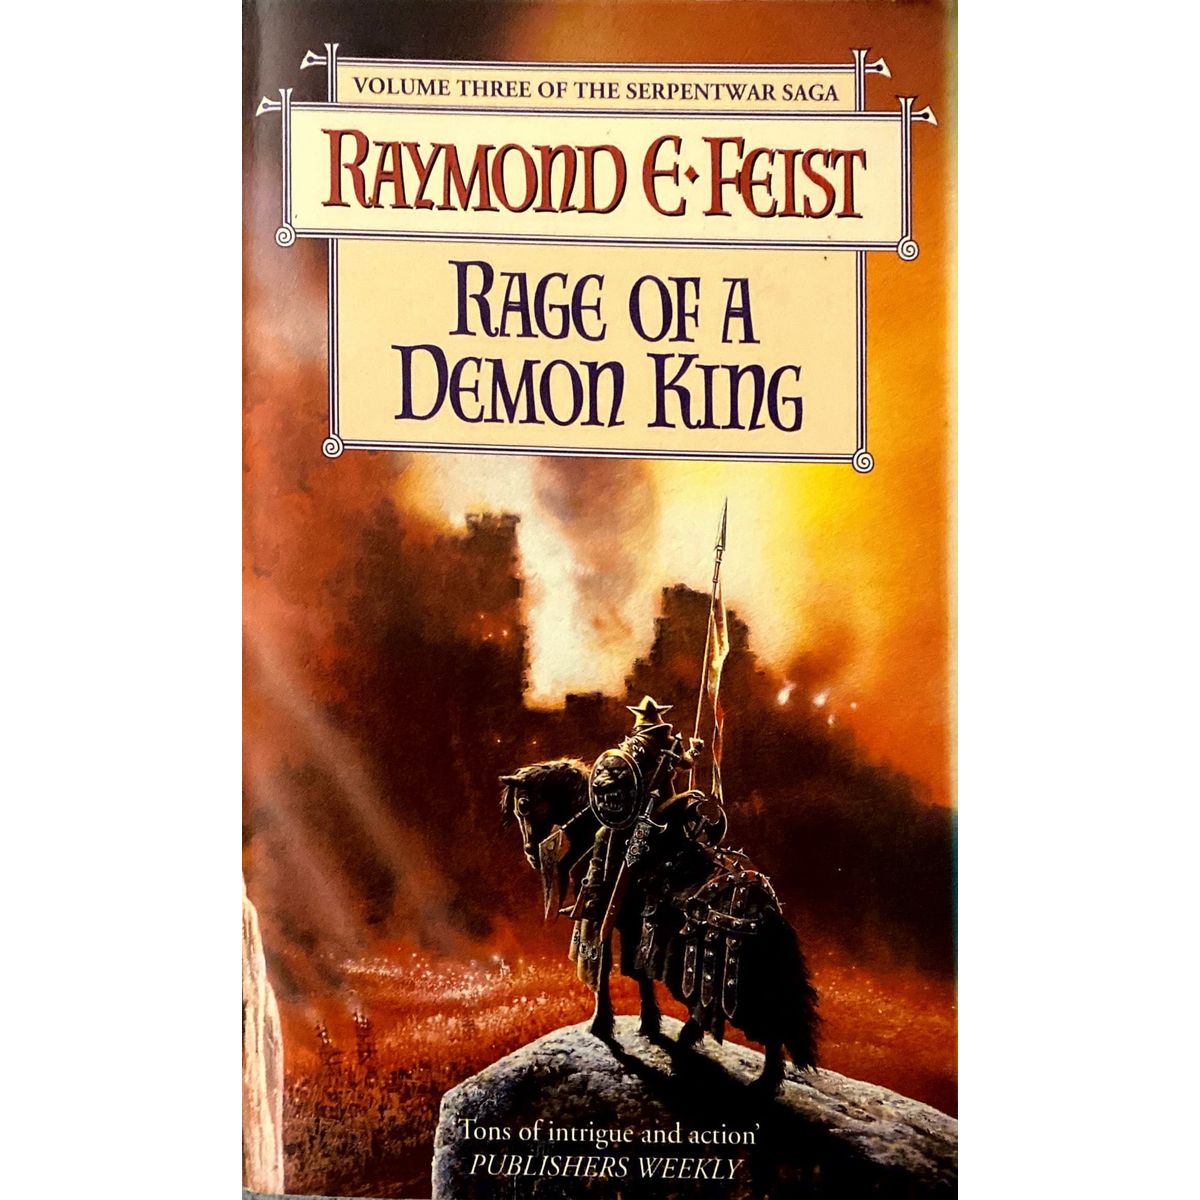 ISBN: 9780006482987 / 0006482988 - Rage of a Demon King by Raymond E. Feist [1998]